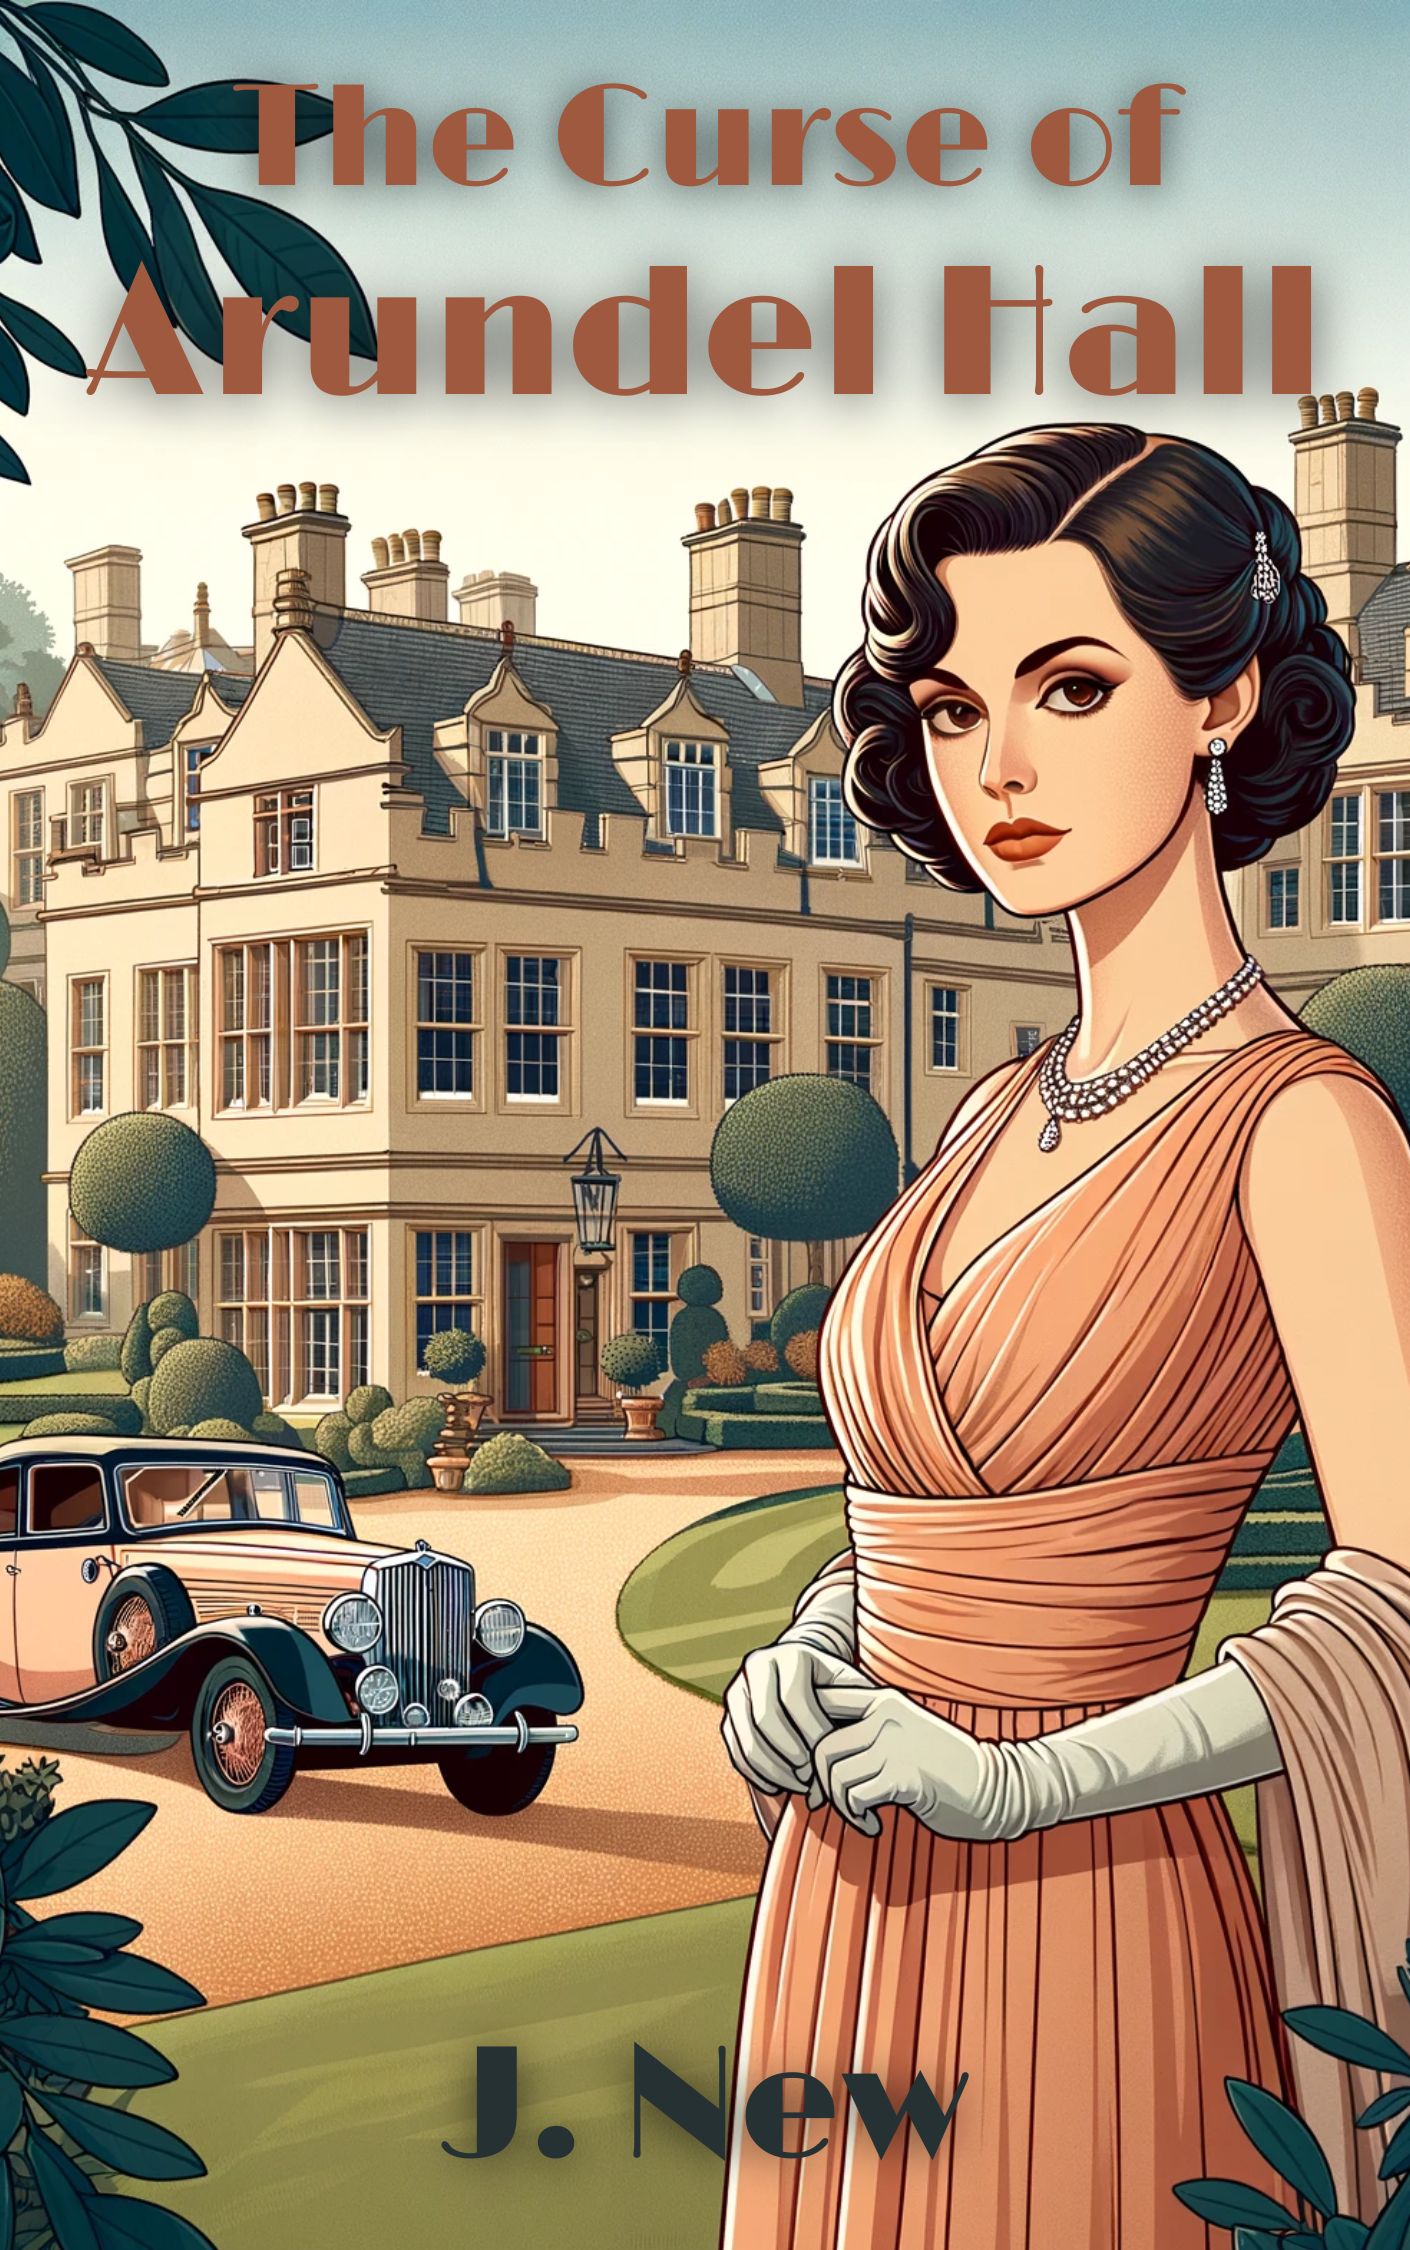 The Curse of Arundel Hall, book 2 in the very popular 1930s British mystery series by author J. New. Dubbed by readers as Miss Marple meets The Ghost Whisperer